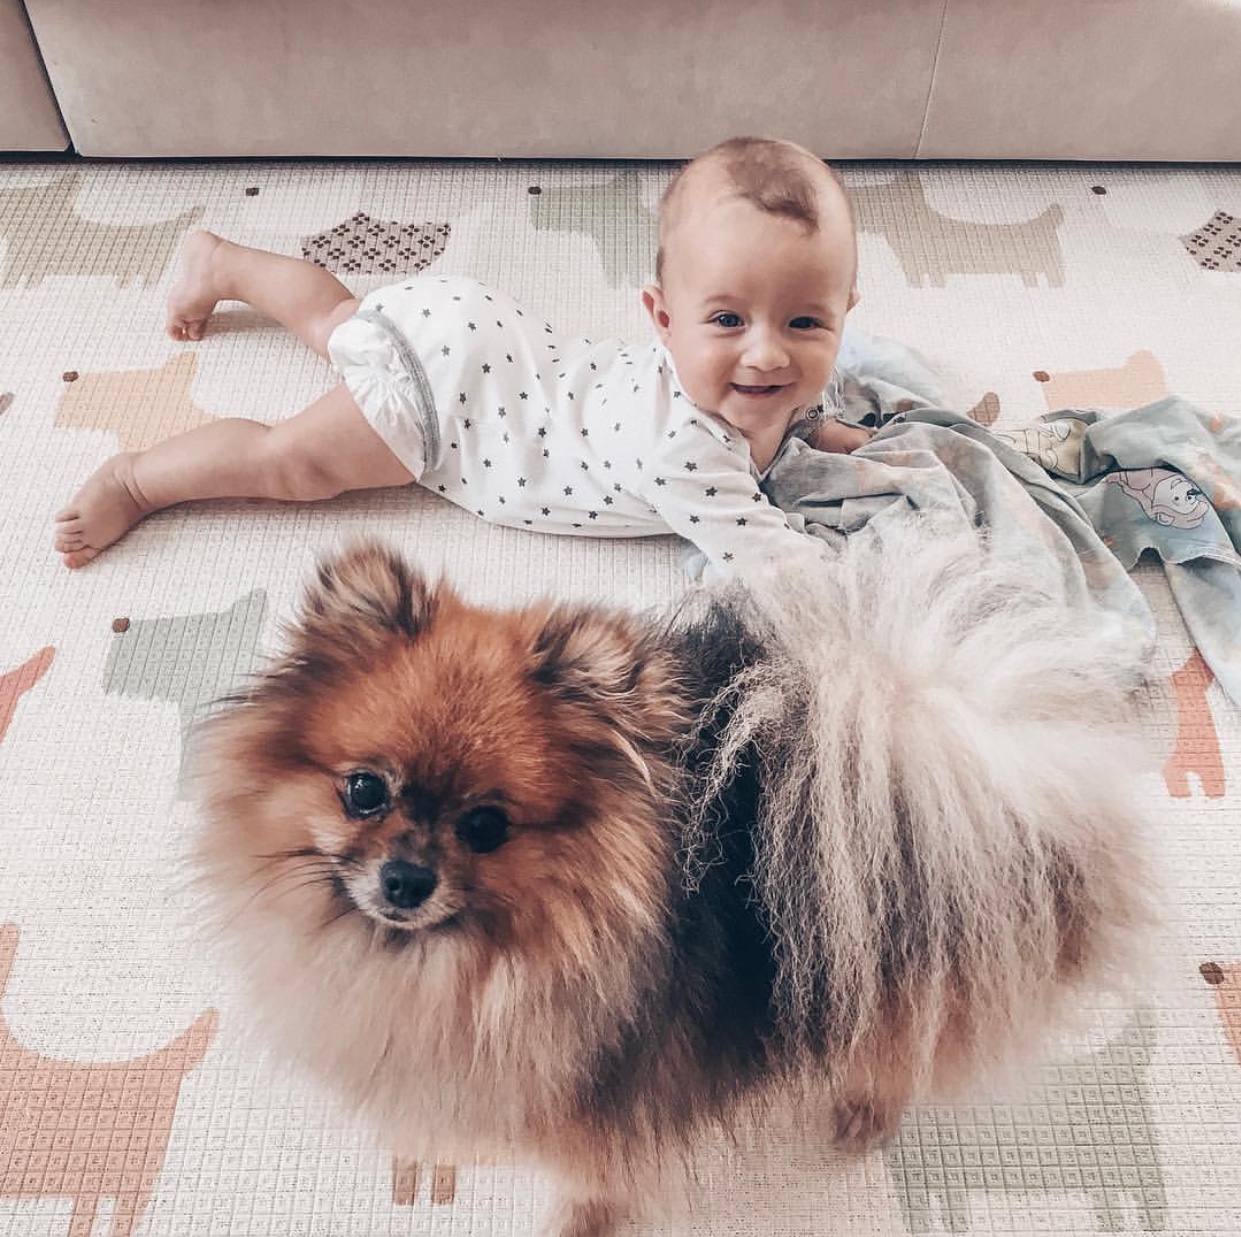 Pomeranian on the floor with a baby